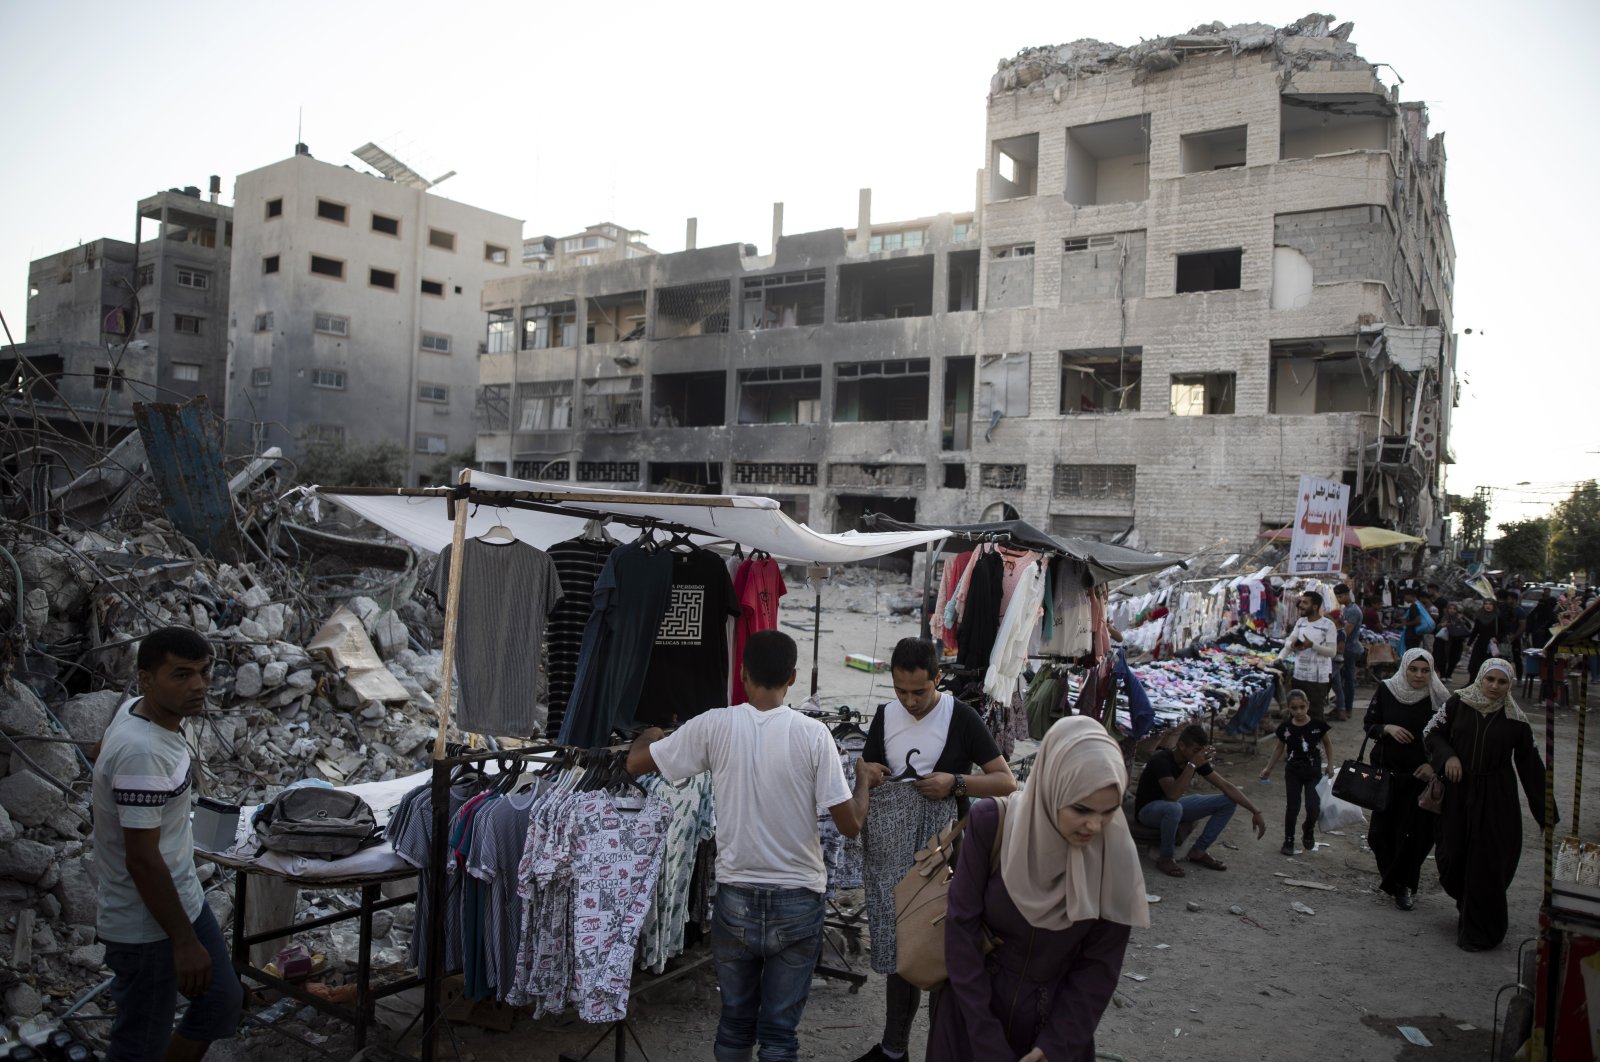 Palestinian street vendors display clothes for sale next to the rubble of destroyed buildings that were hit by Israeli airstrikes in Gaza City, Palestine, July 18, 2021. (AP Photo)